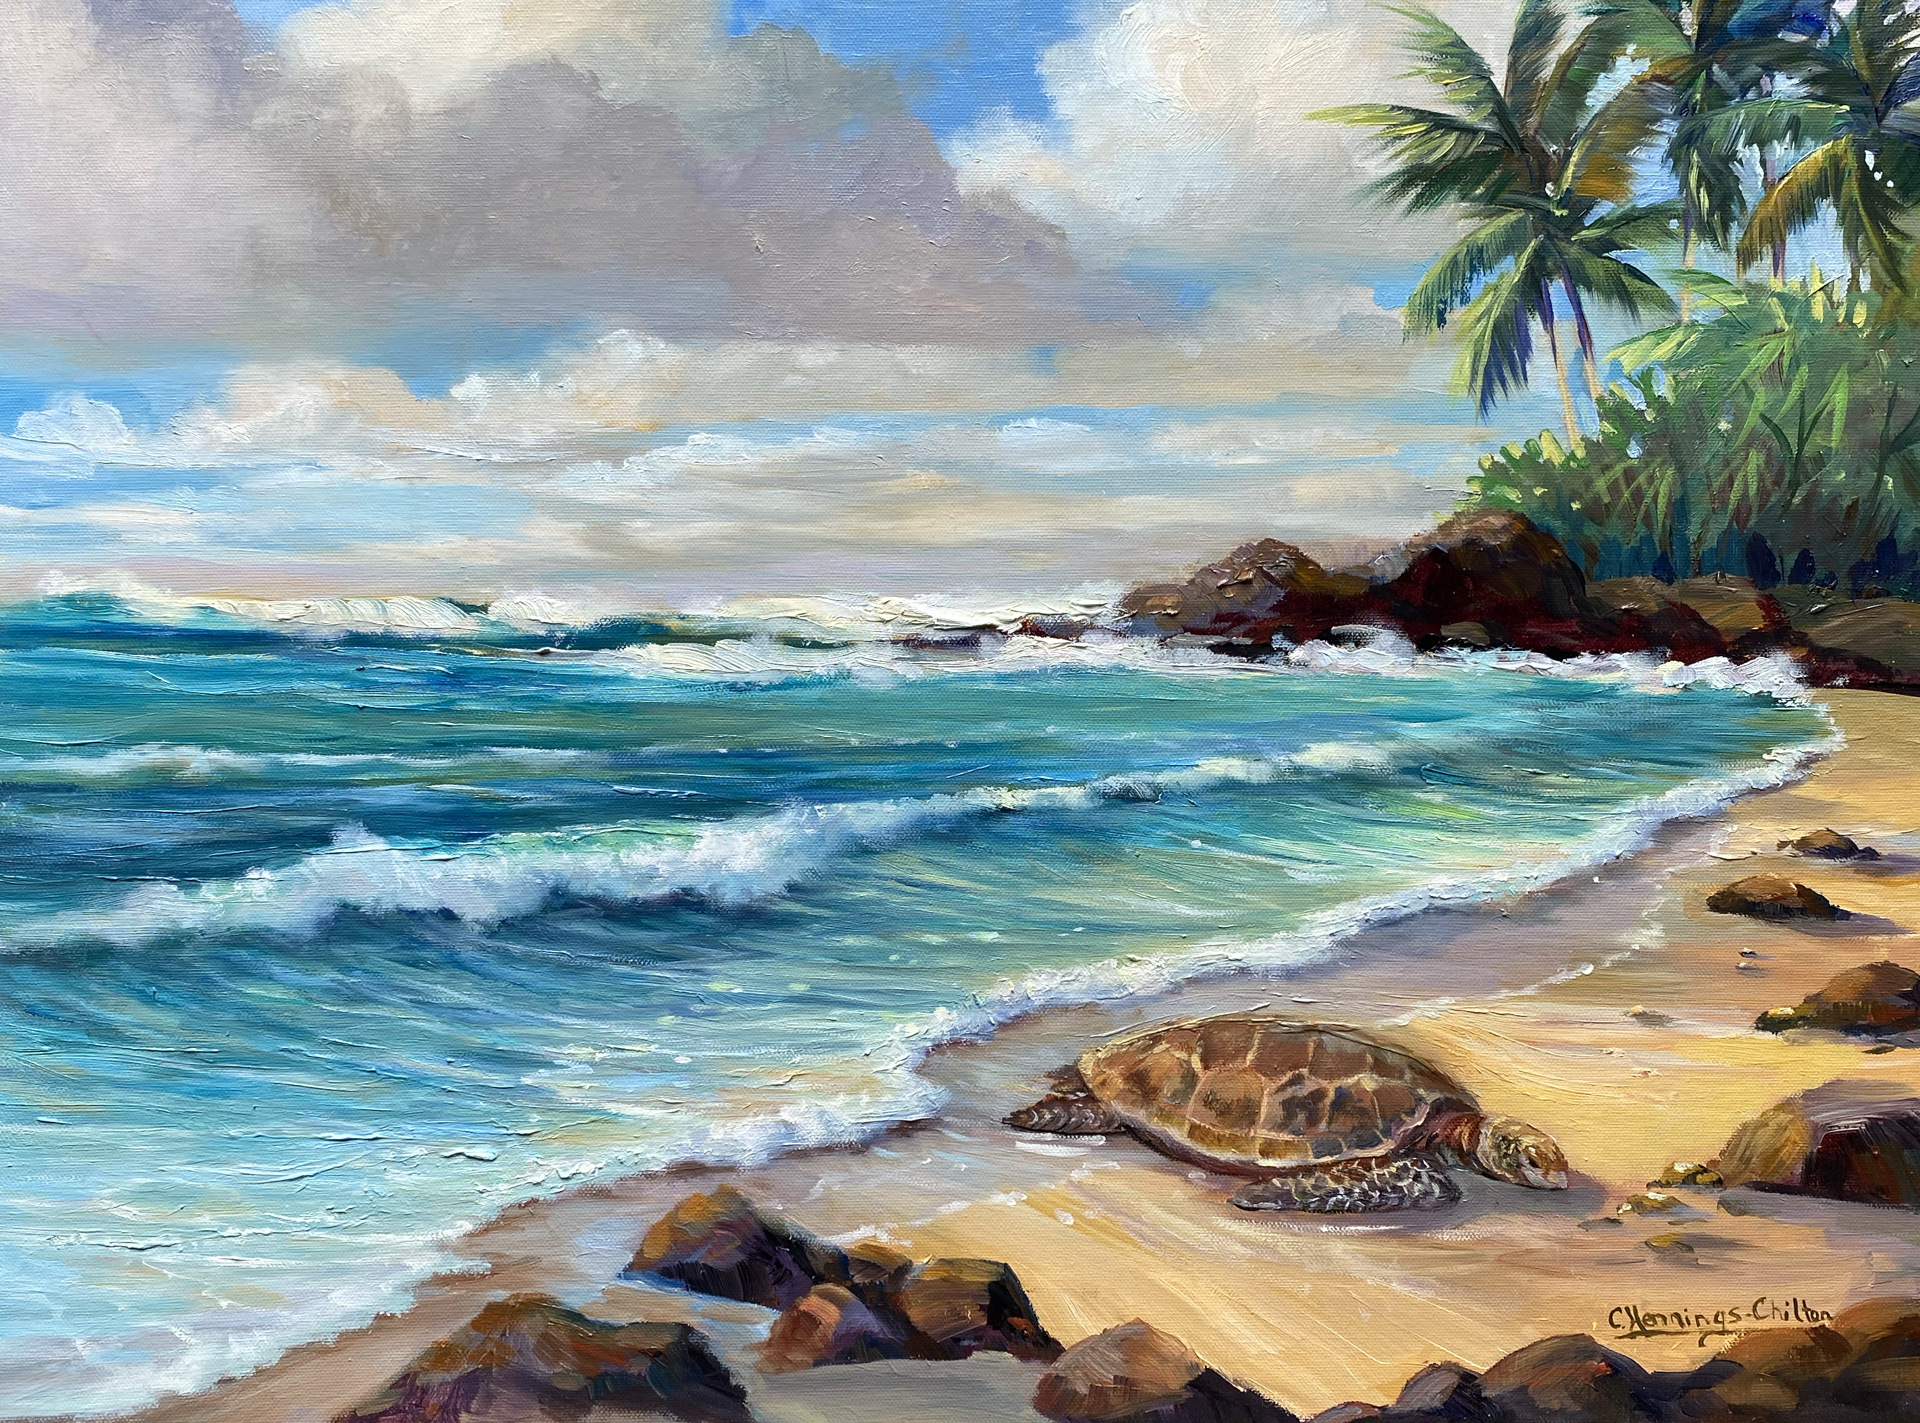 Turtle Beach by Connie Hennings-Chilton